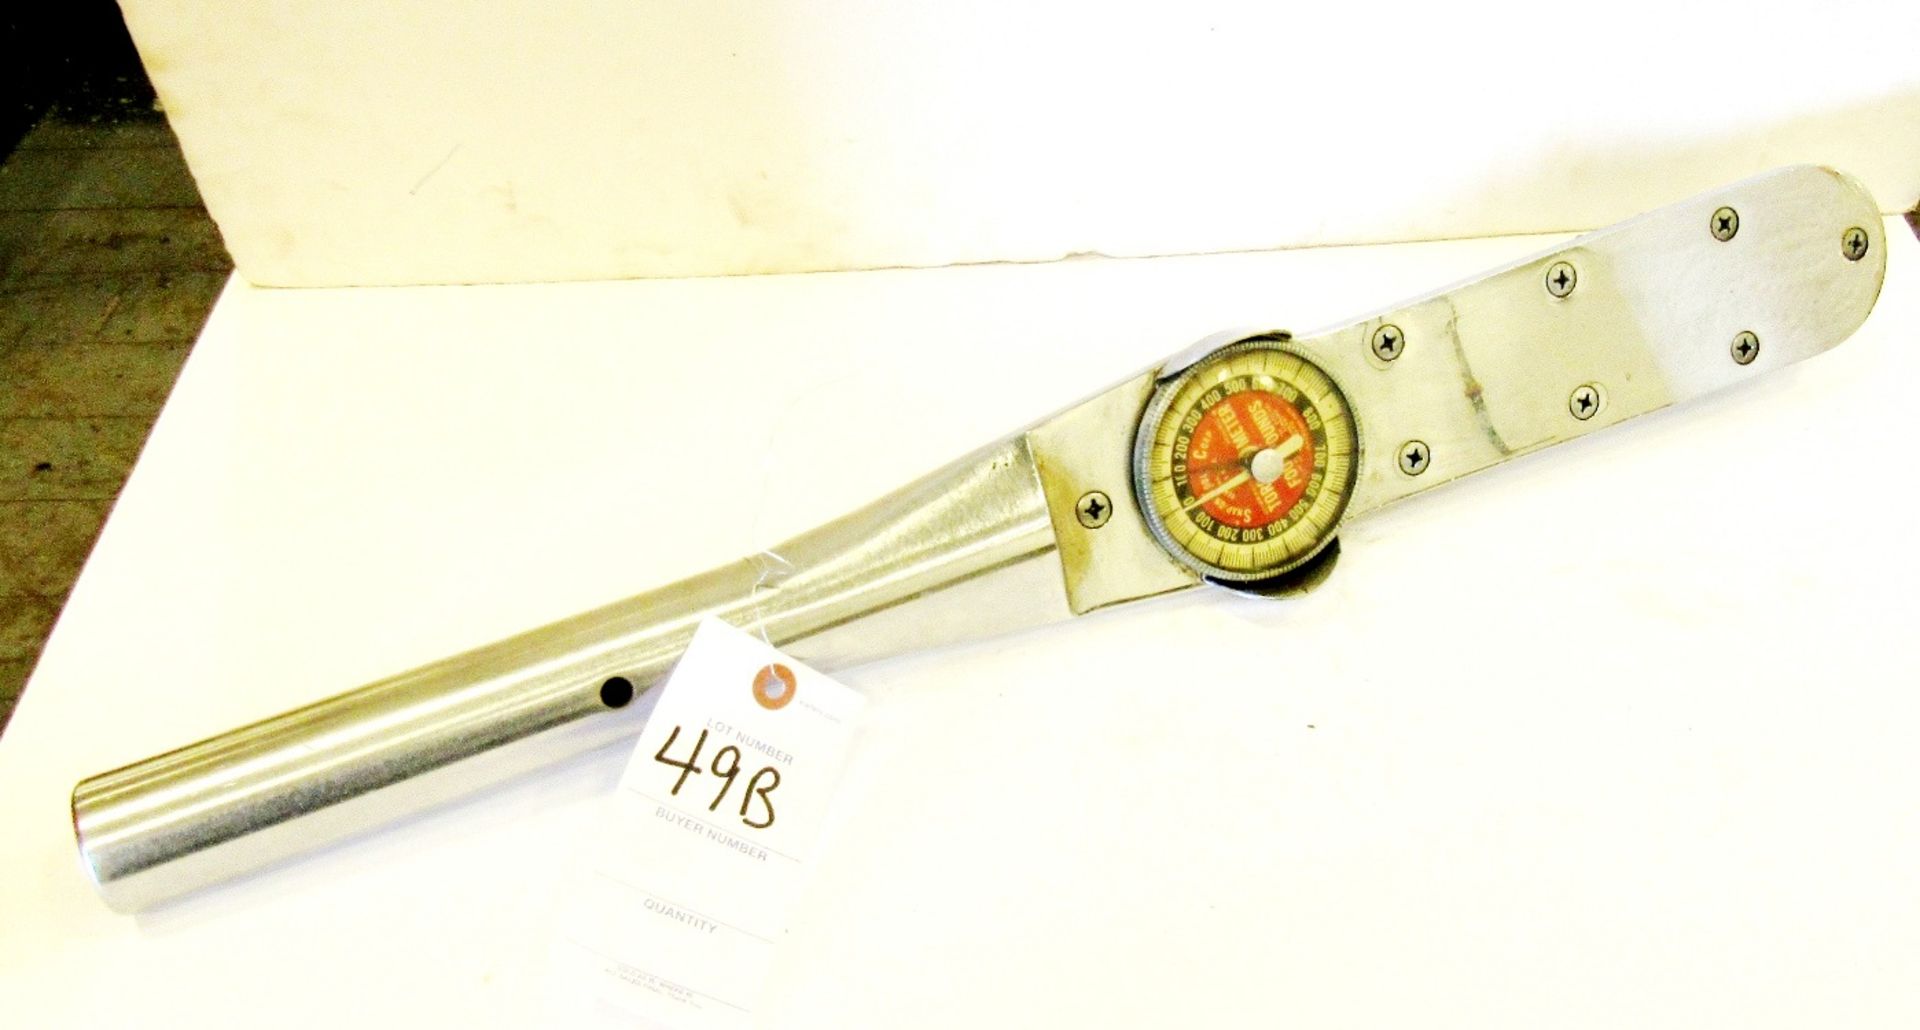 1" Snap-On Torqometer Torque Wrench - Image 2 of 3